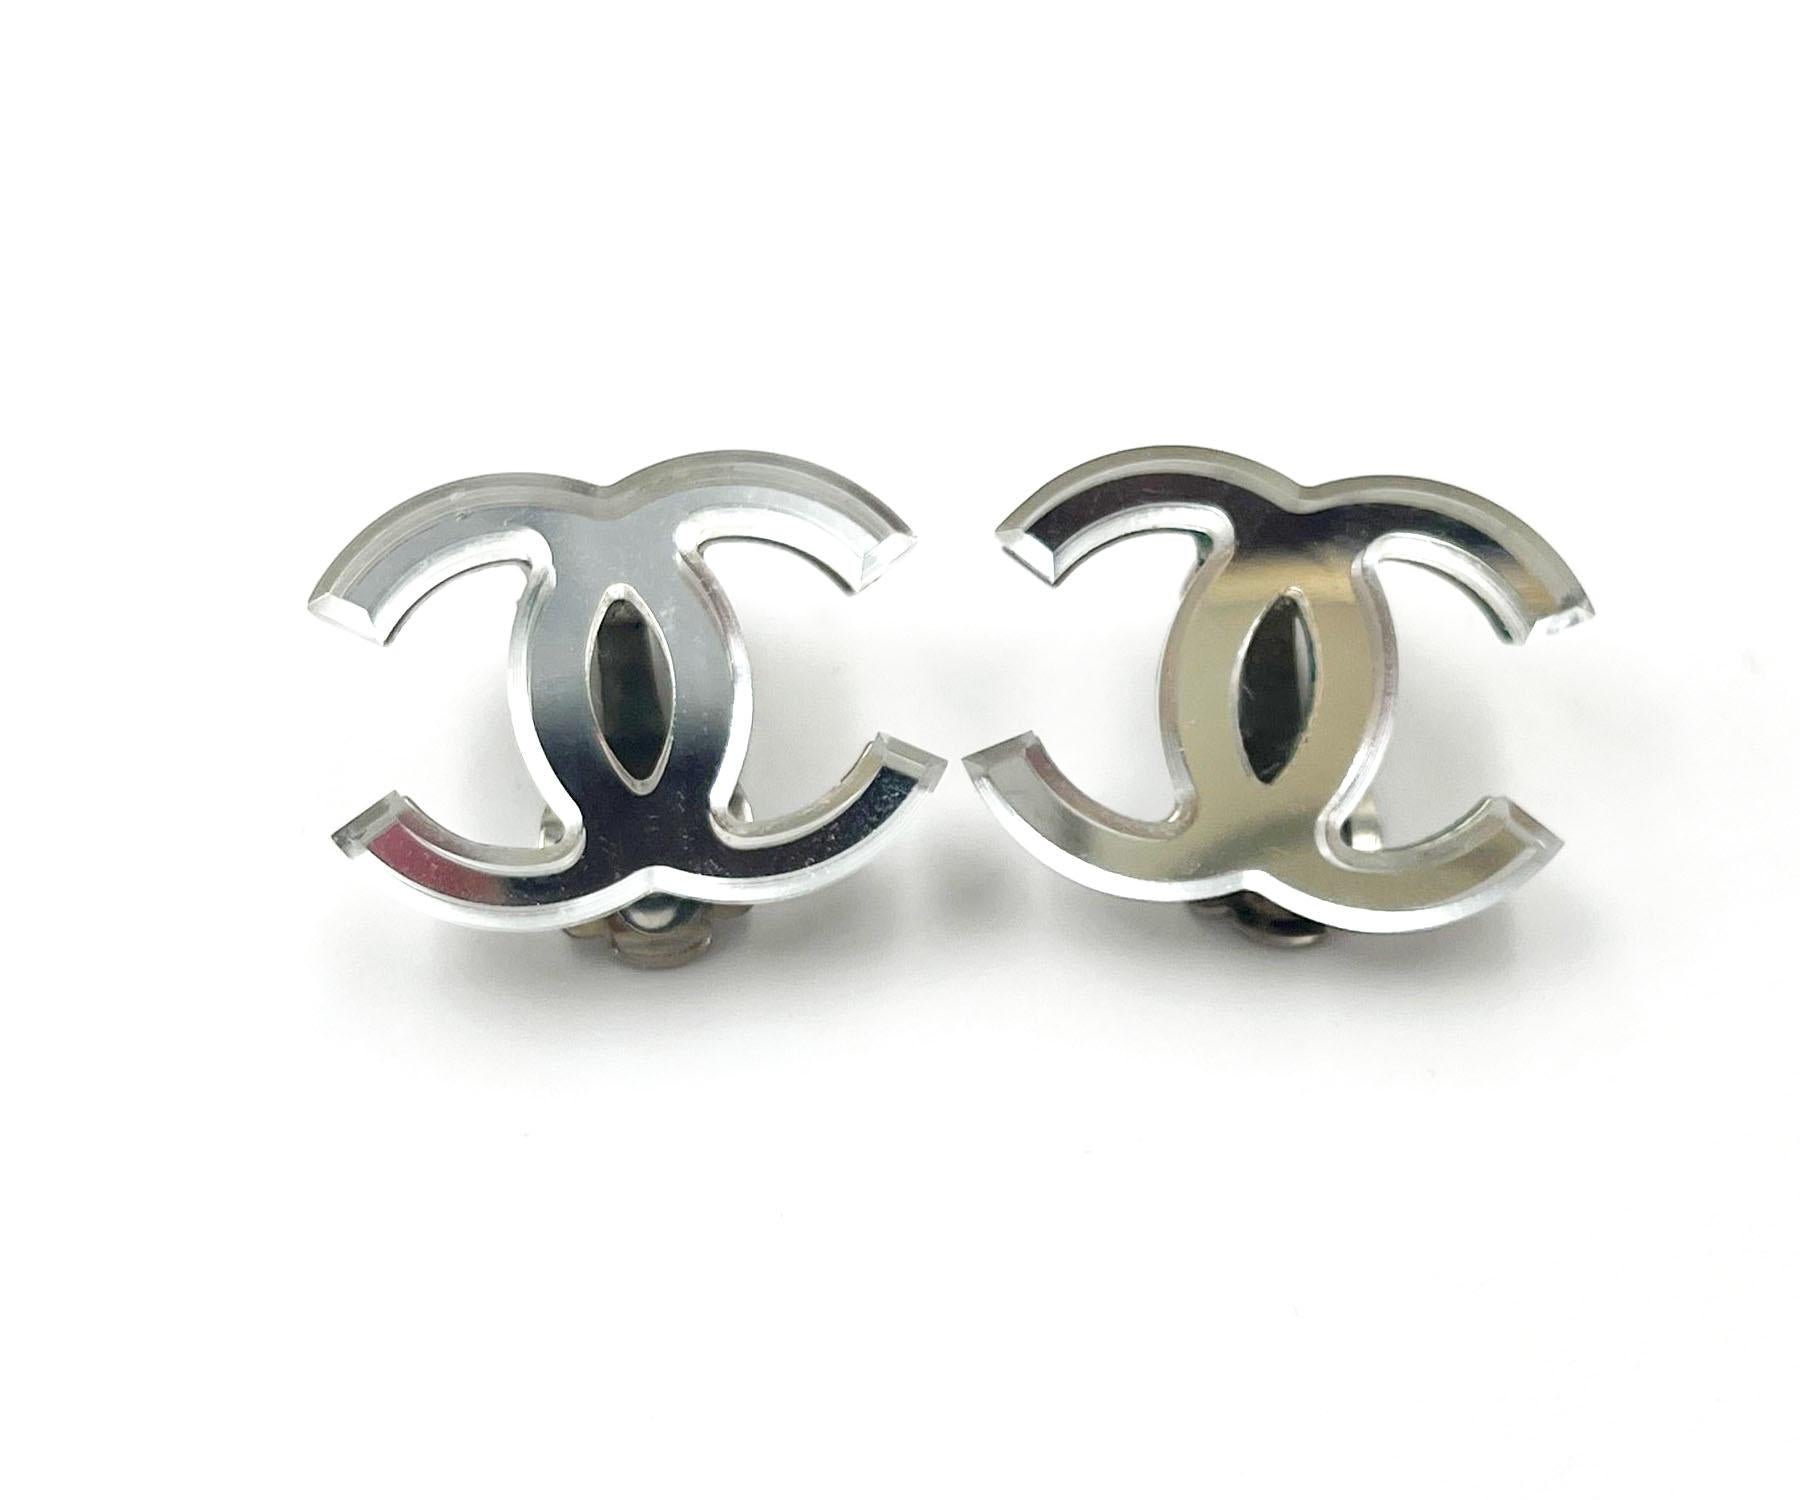 Chanel Silver CC Mirror Large Clip on Earrings

* Marked 03
* Made in France
* Comes with the original box

-It is approximately 1